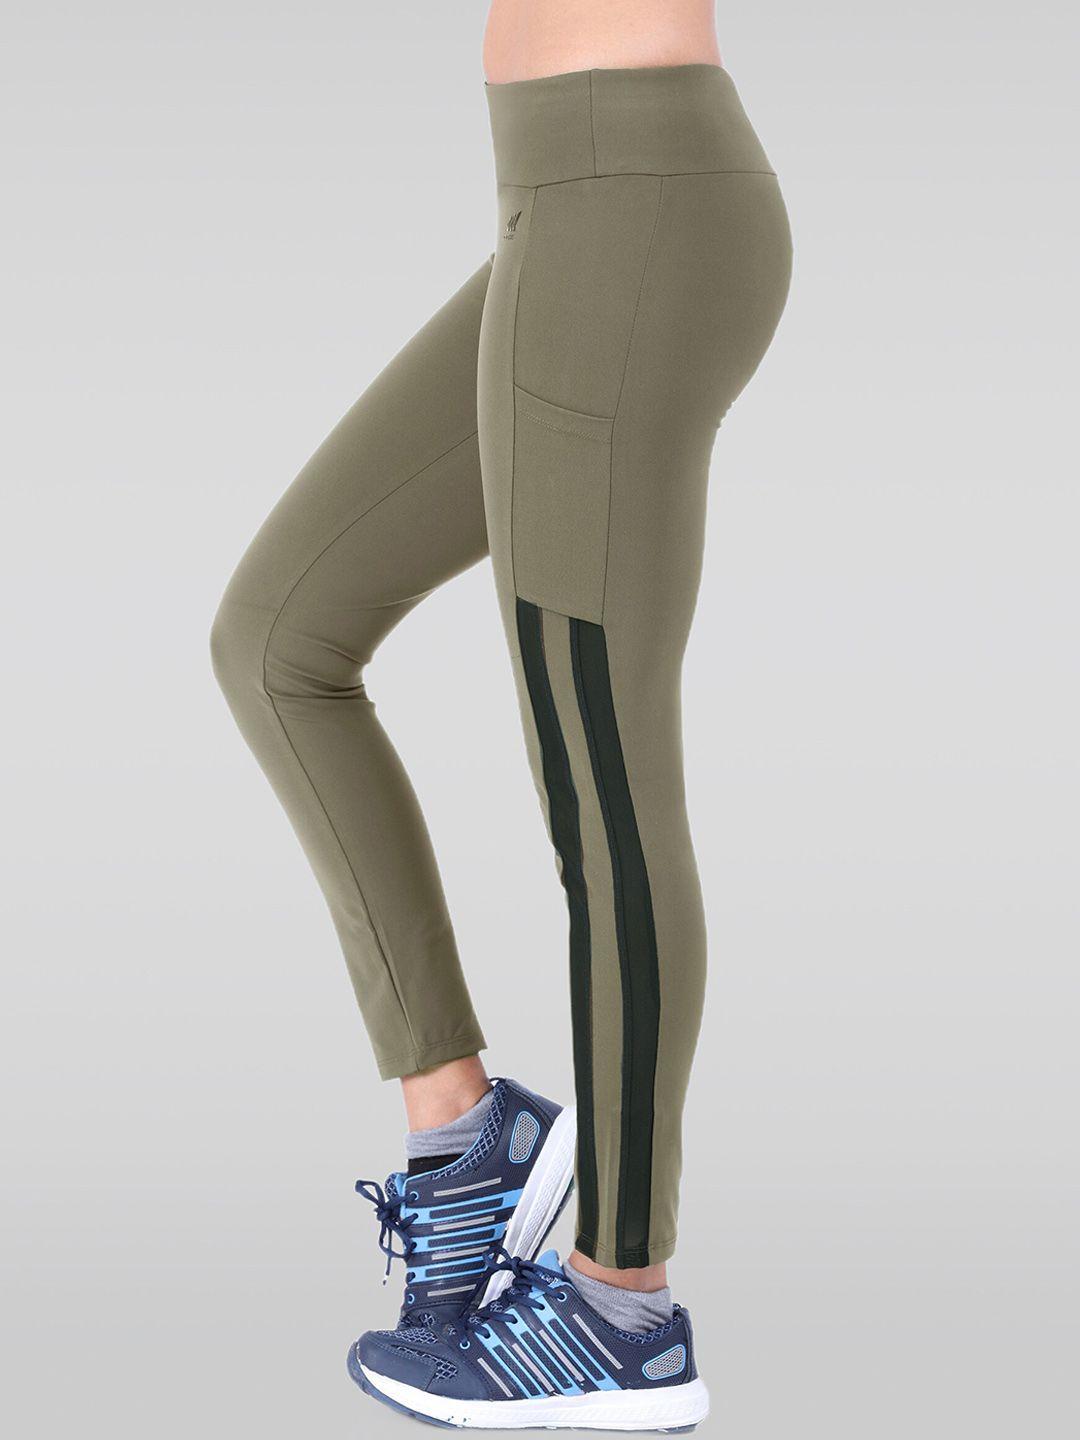 laasa-sports-women-slim-fit-dry-fit-ankle-length-sports-tights